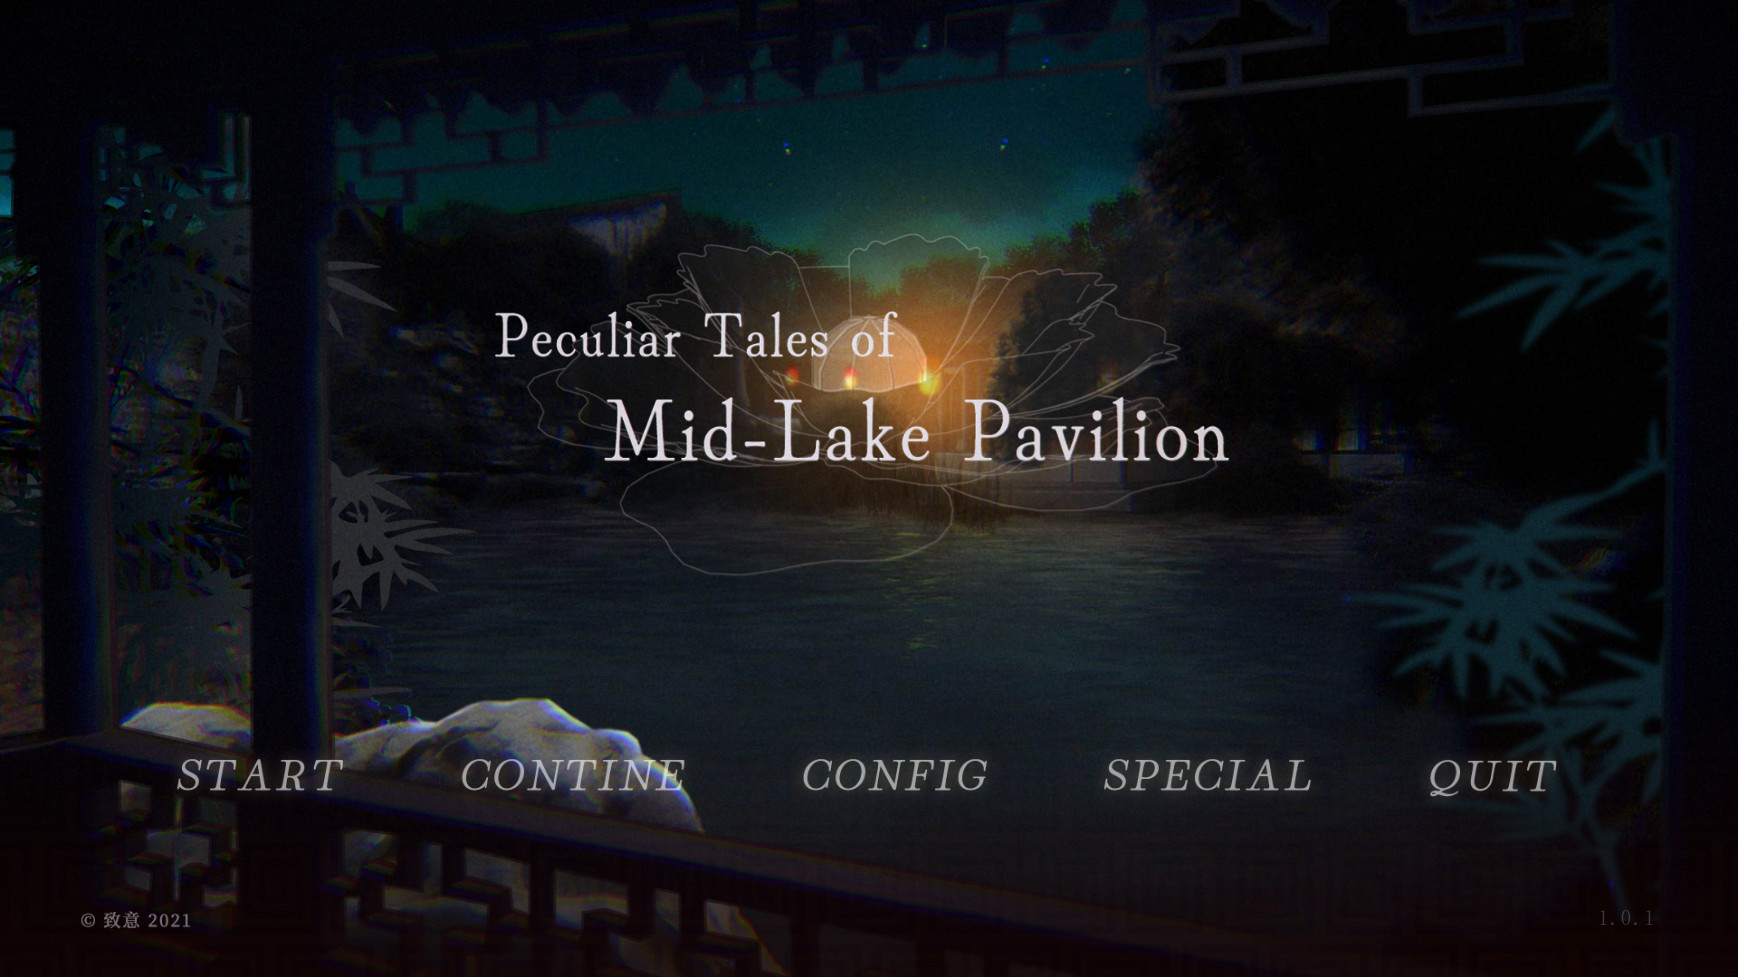 Find the best laptops for Peculiar Tales of Mid-Lake Pavilion